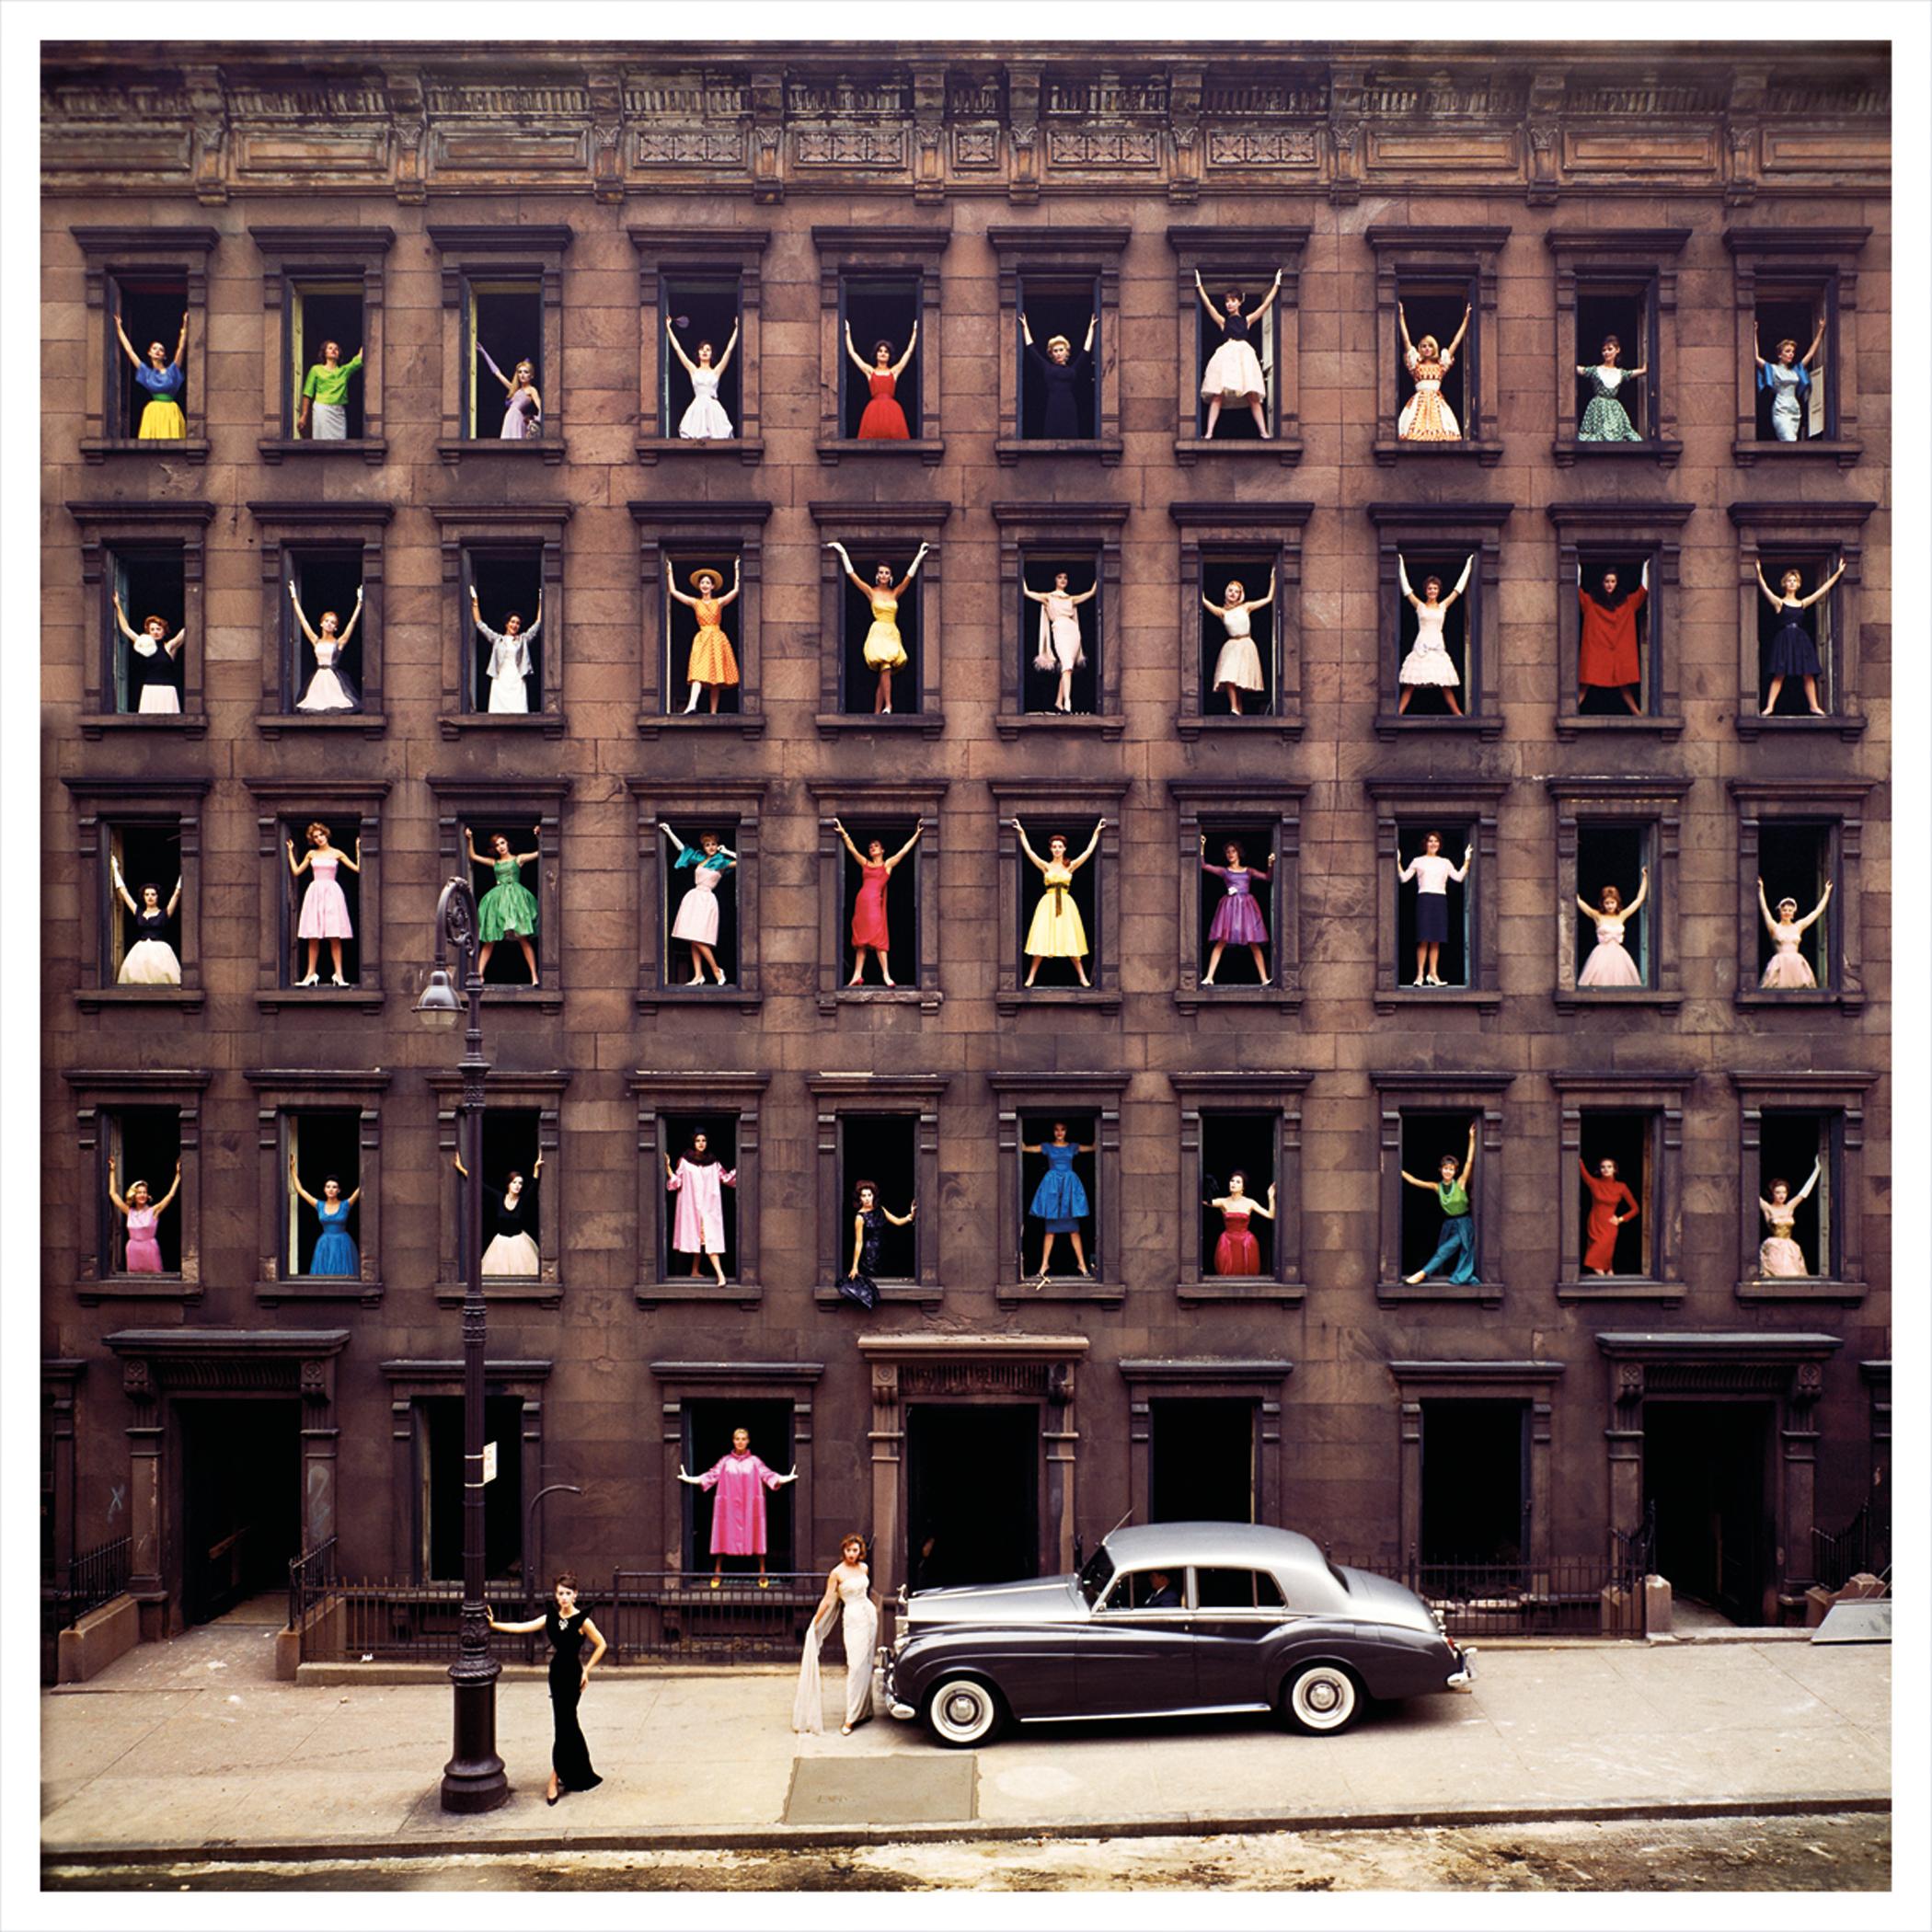 Ormond Gigli
Girls in the Window, 1960 (printed later)
Color coupler print
27 x 27 inches
edition of 44
Signed, numbered and dated by the artist

Ormond Gigli: The Visionary Behind the "Girls in the Windows"
Ormond Gigli is a highly regarded